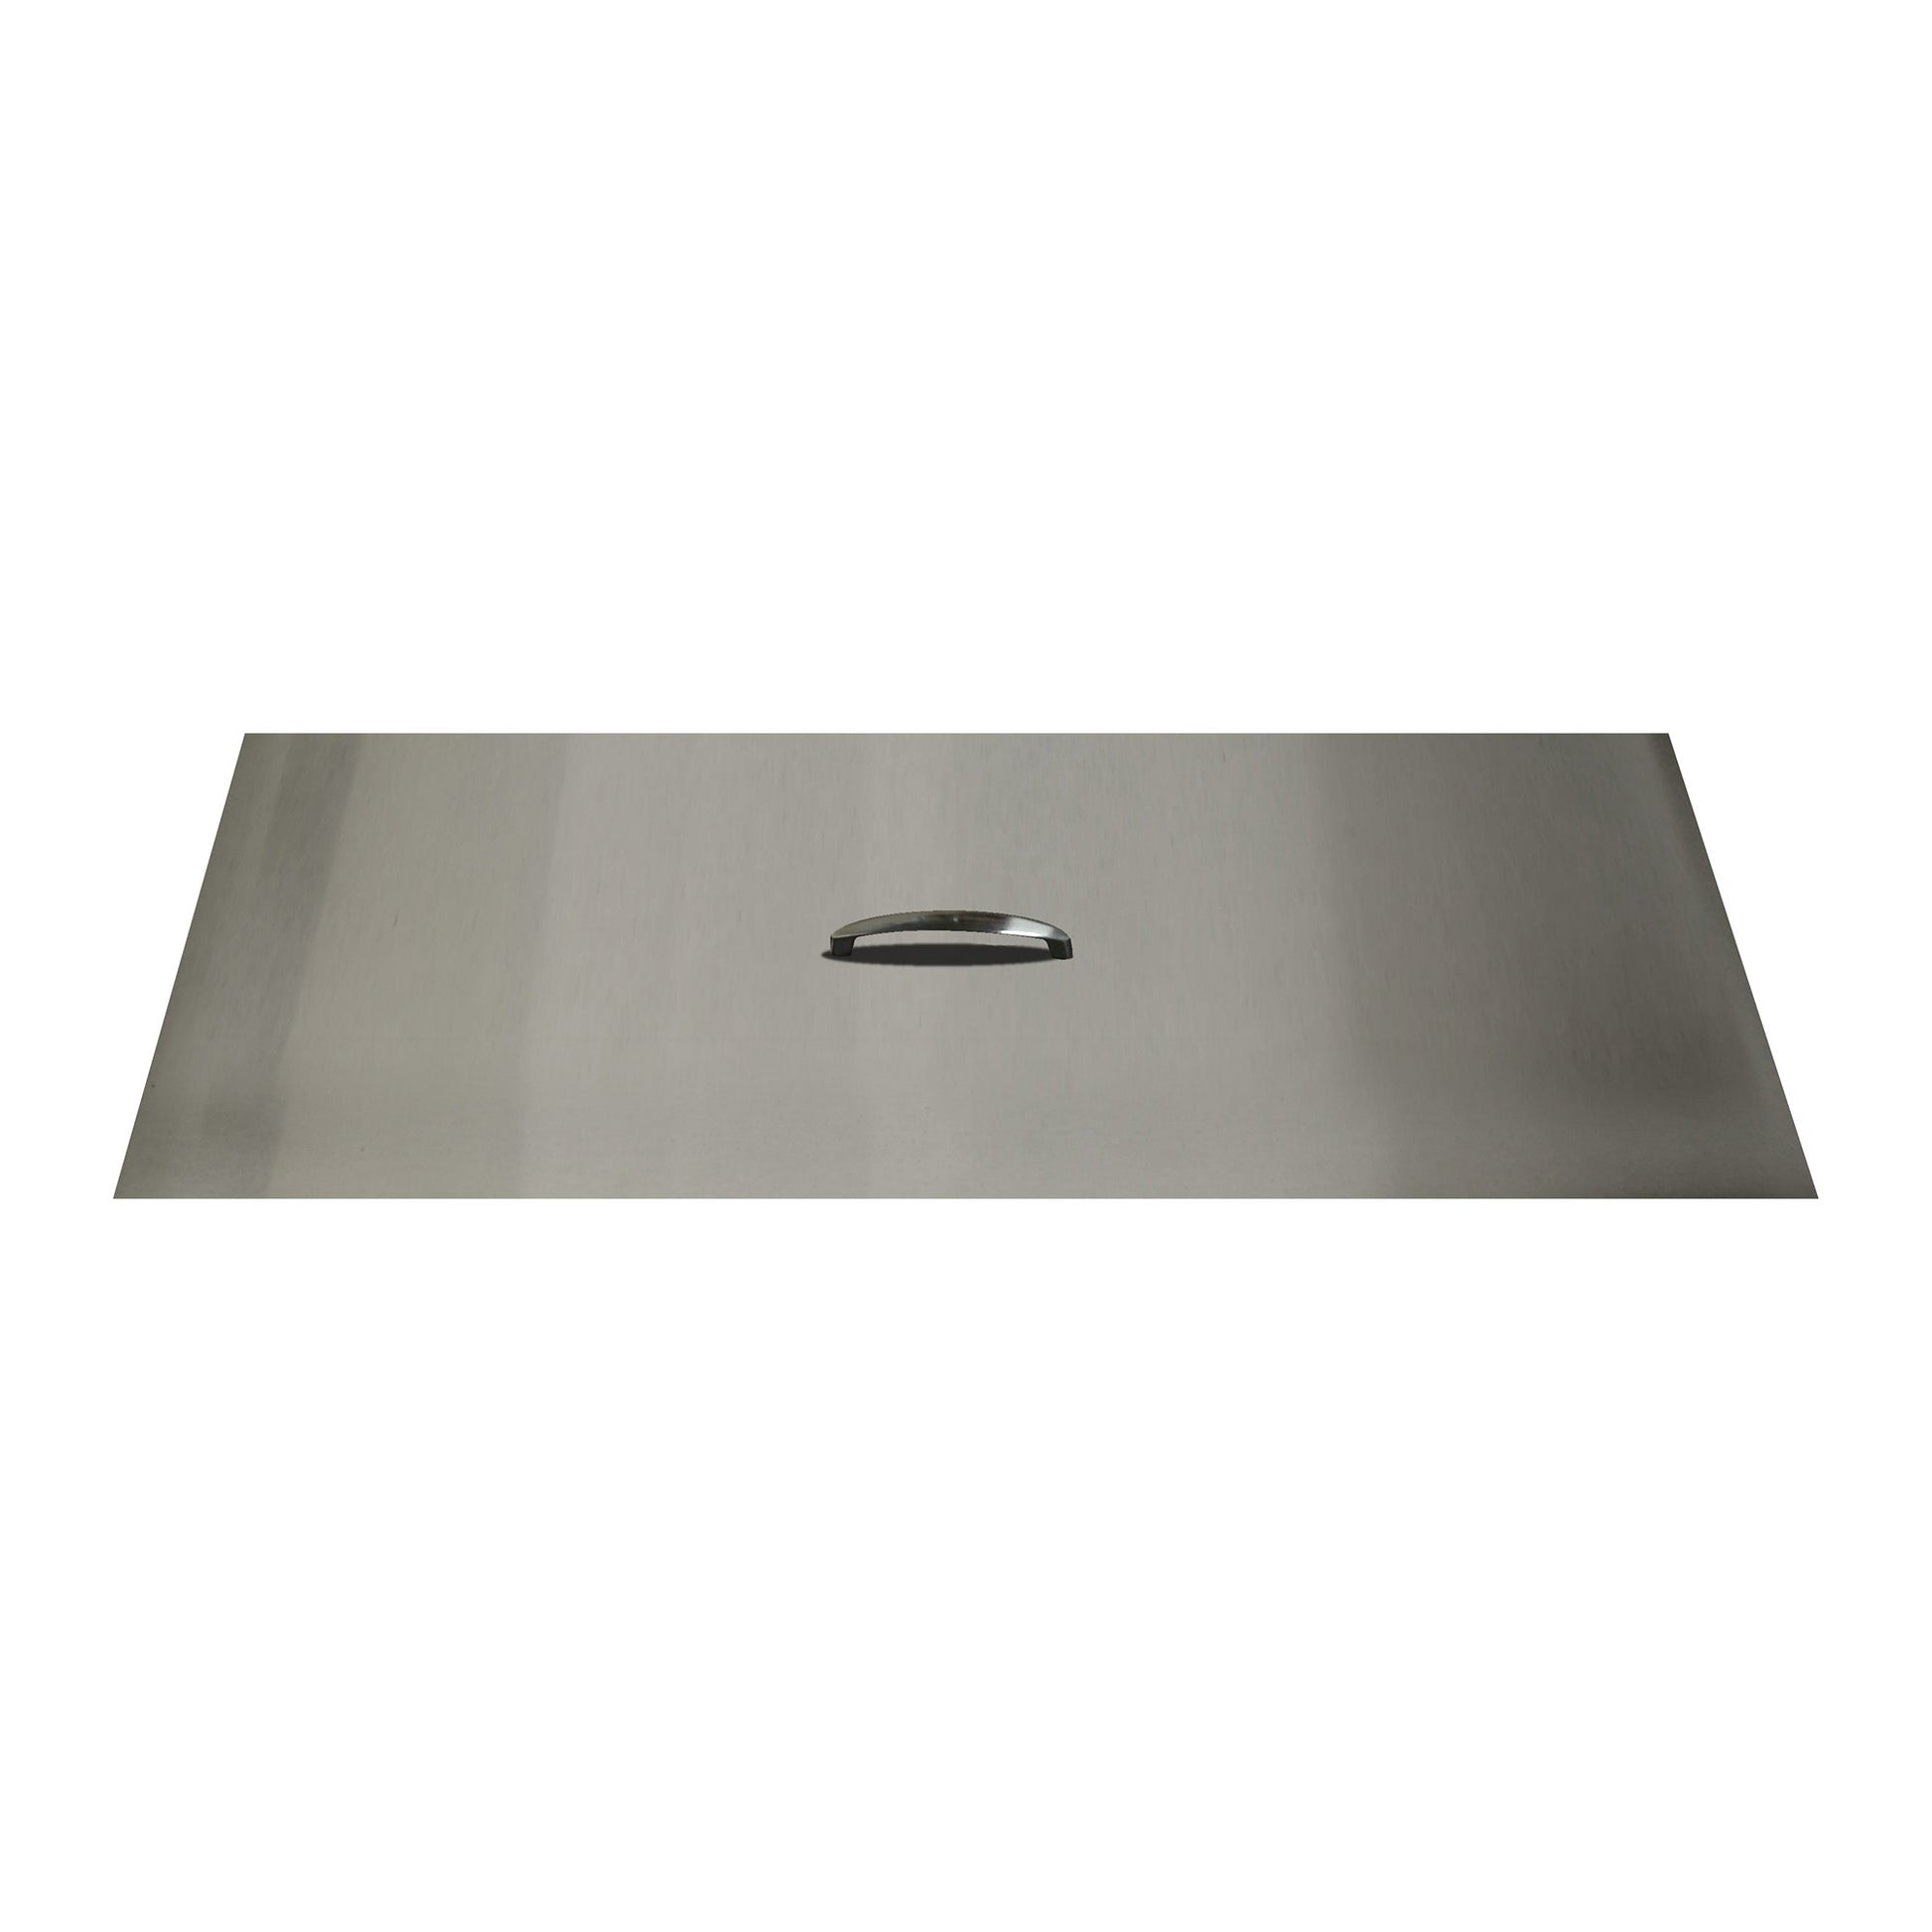 The Outdoor Plus Dixie 10" x 38" Stainless Steel Rectangular Fire Pit Lid Cover